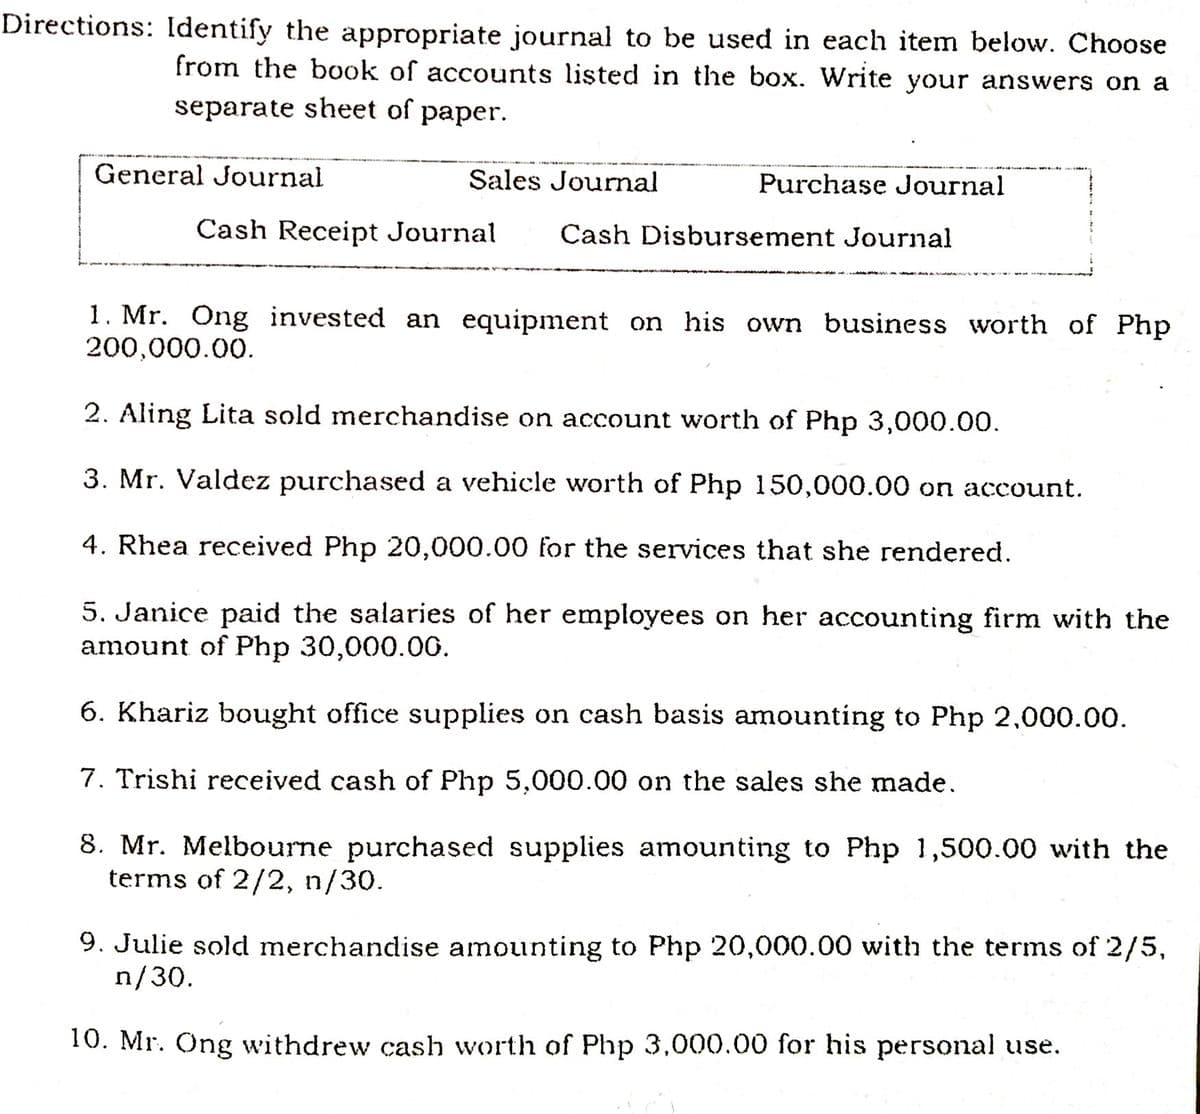 Directions: Identify the appropriate journal to be used in each item below. Choose
from the book of accounts listed in the box. Write your answers on a
separate sheet of paper.
General Journal
Sales Journal
Purchase Journal
Cash Receipt Journal
Cash Disbursement Journal
1. Mr. Ông invested an equipment on his own business worth of Php
200,000.00.
2. Aling Lita sold merchandise on account worth of Php 3,000.00.
3. Mr. Valdez purchased a vehicle worth of Php 150,000.00 on account.
4. Rhea received Php 20,000.00 for the services that she rendered.
5. Janice paid the salaries of her employees on her accounting firm with the
amount of Php 30,000.00.
6. Khariz bought office supplies on cash basis amounting to Php 2,000.00.
7. Trishi received cash of Php 5,000.00 on the sales she made.
8. Mr. Melbourne purchased supplies amounting to Php 1,500.00 with the
terms of 2/2, n/30.
9. Julie sold merchandise amounting to Php 20,000.00 with the terms of 2/5,
n/30.
10. Mr. Ong withdrew cash worth of Php 3,000.00 for his personal use.
